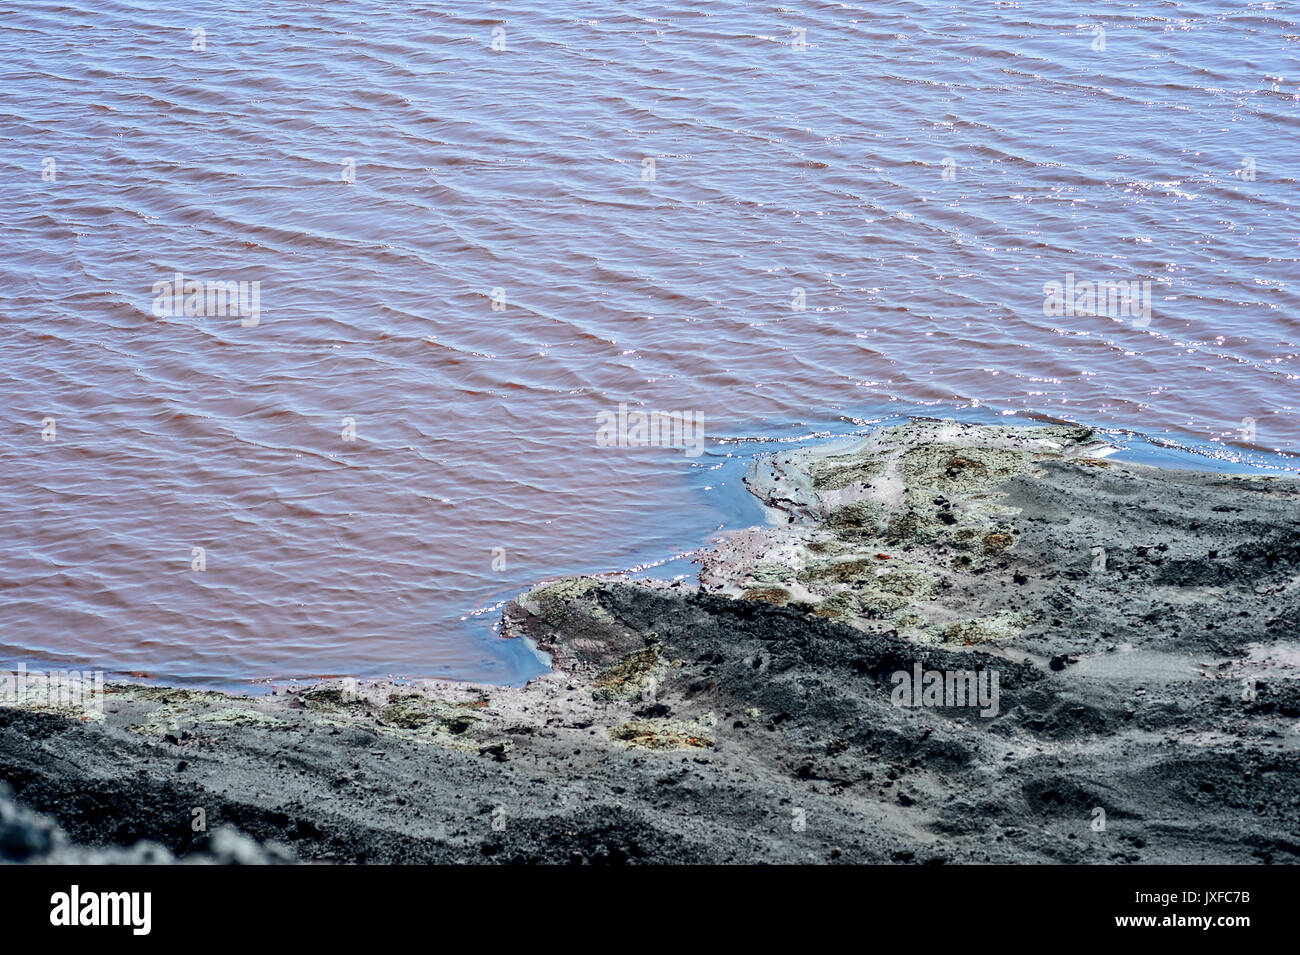 Production waste is accumulated in water. Stock Photo